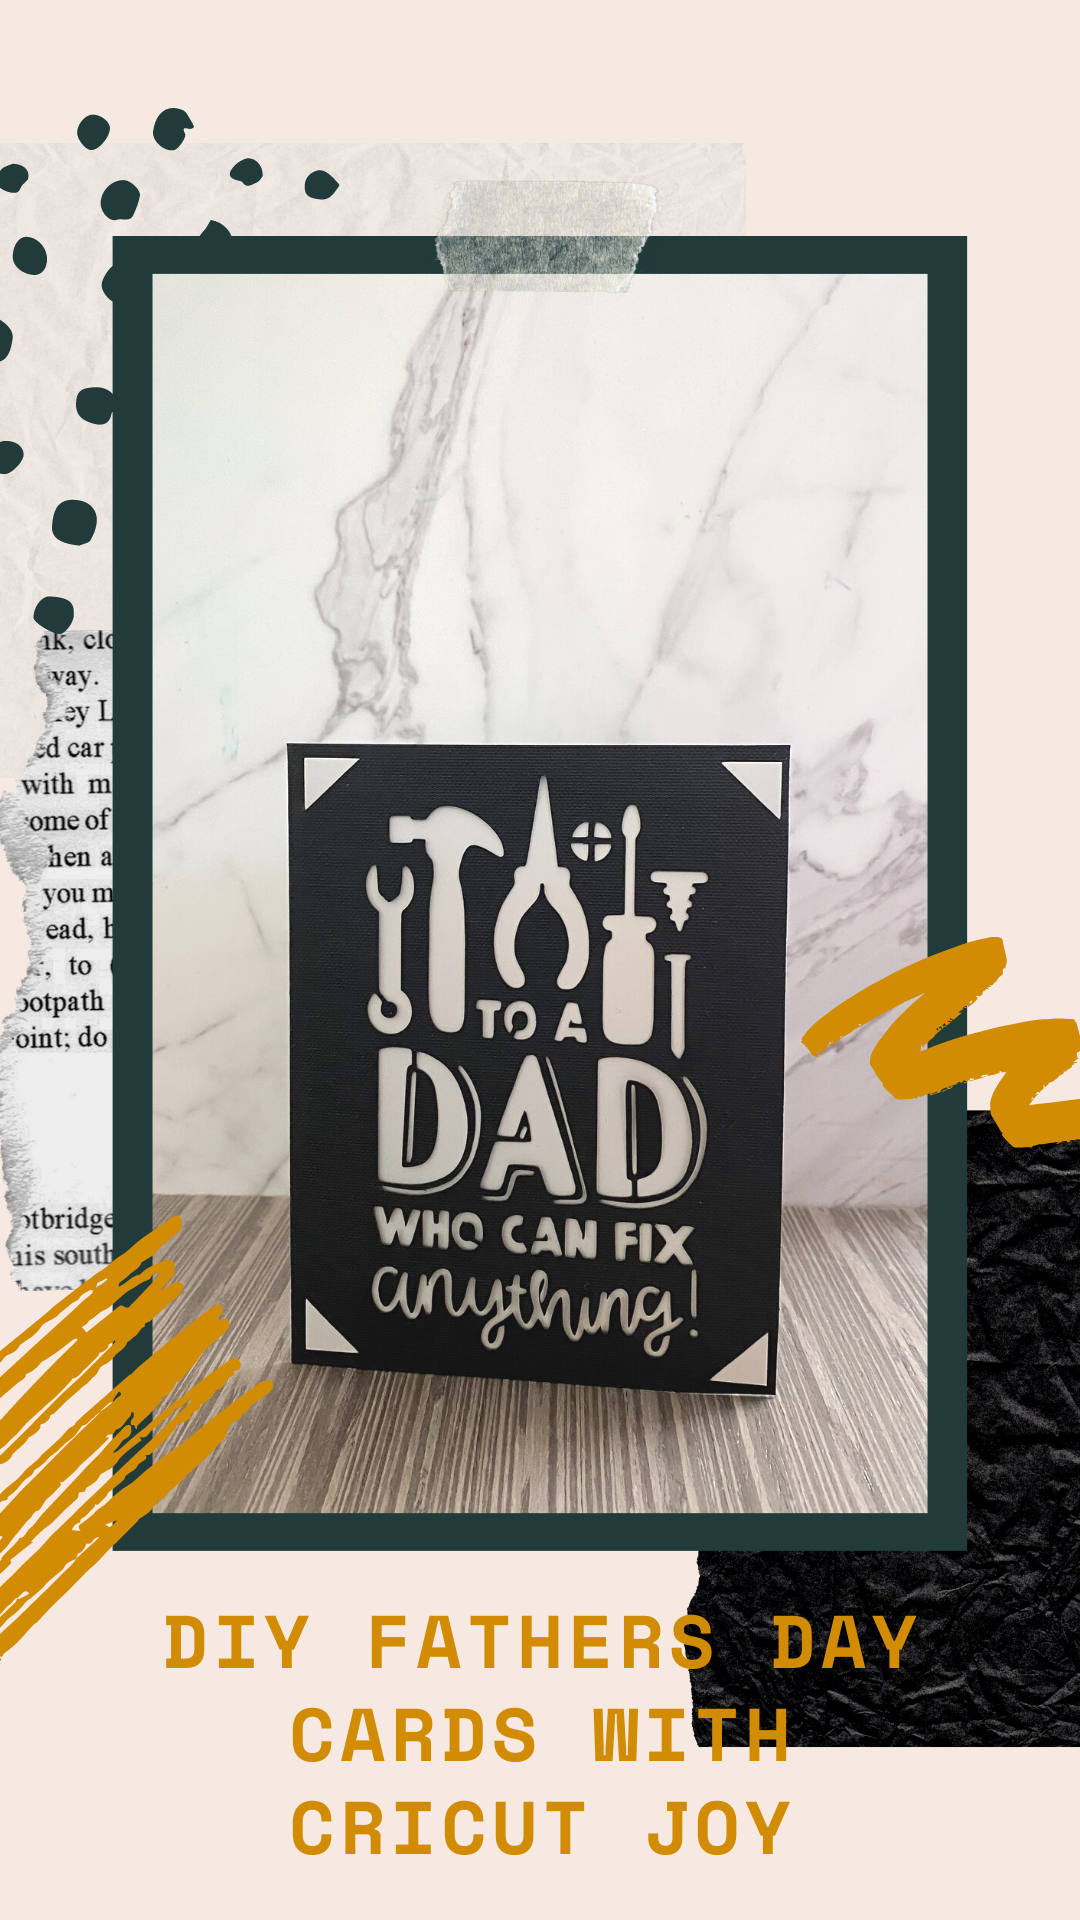 Easy to make, DIY Fathers Day Cards made with the Cricut Joy machine. So easy, you can make it yourself in less than 5 minutes! via @brookeberry